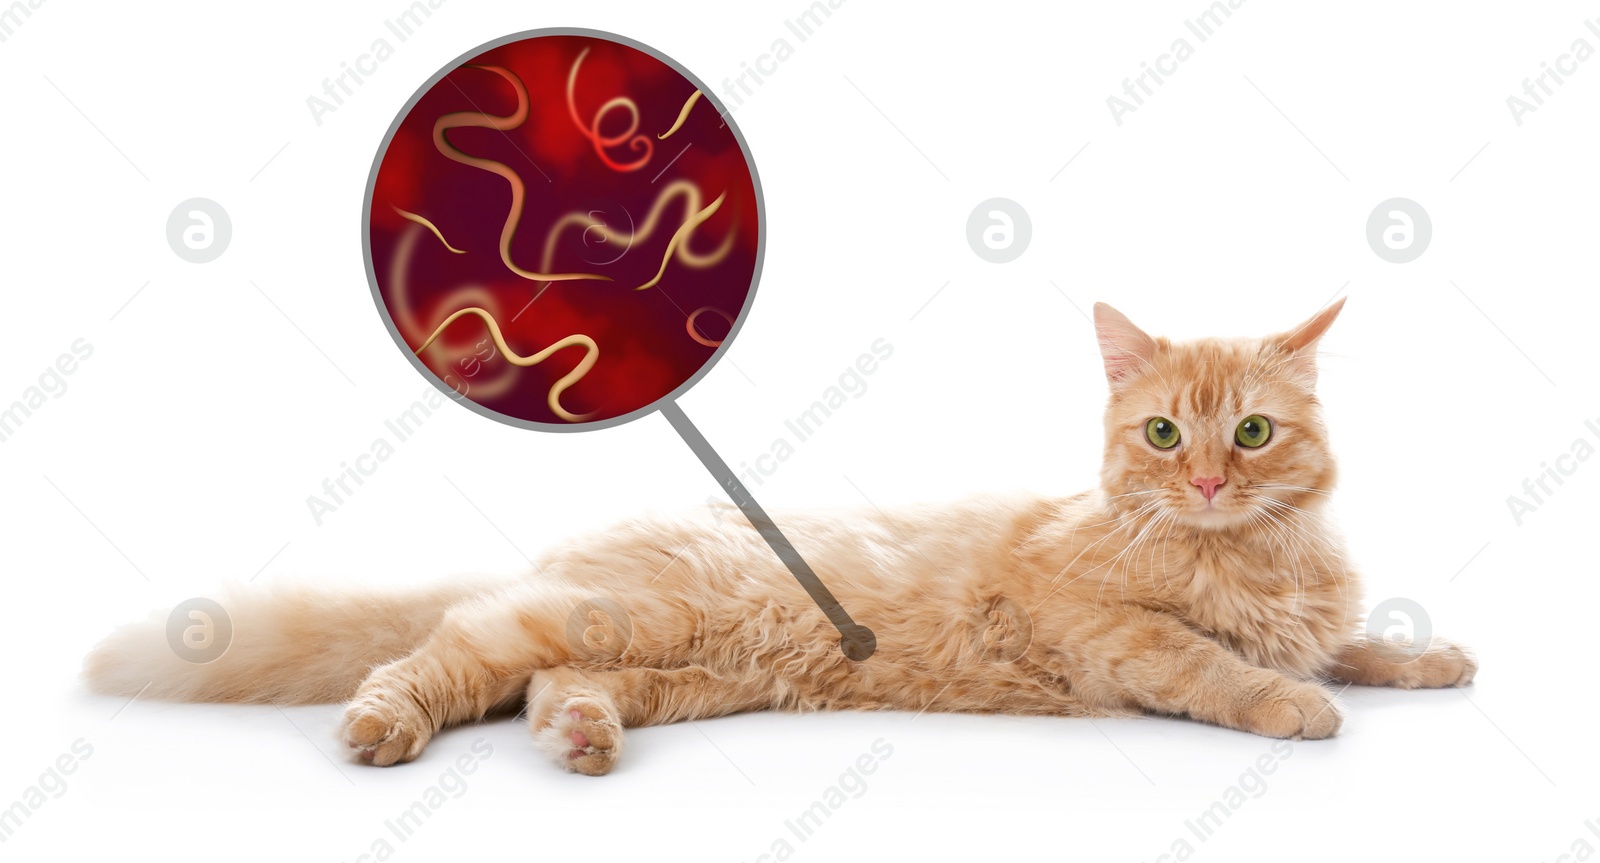 Image of Cute cat and illustration of helminths under microscope on white background, banner design. Parasites in animal